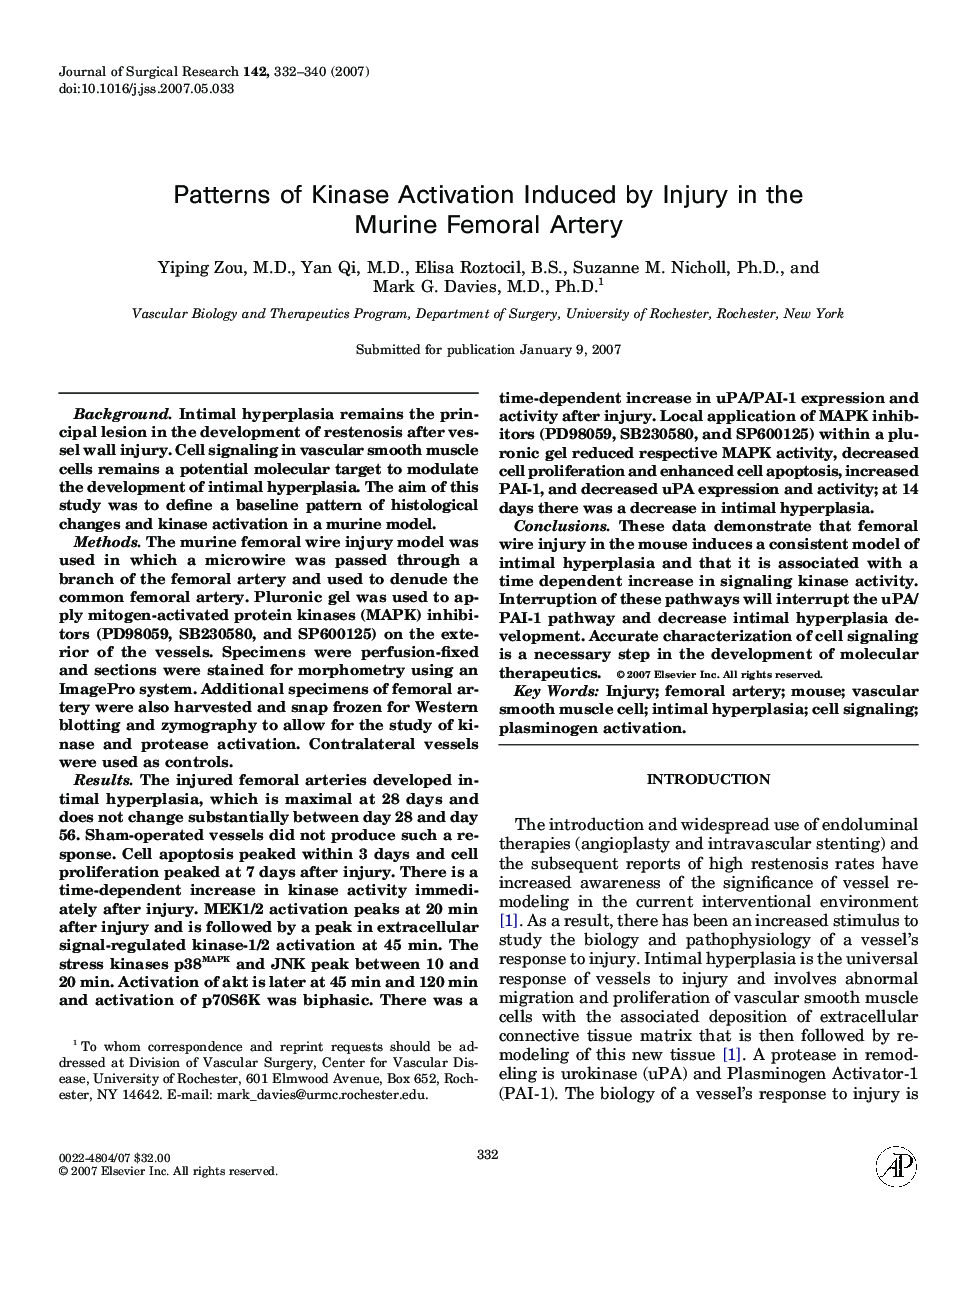 Patterns of Kinase Activation Induced by Injury in the Murine Femoral Artery